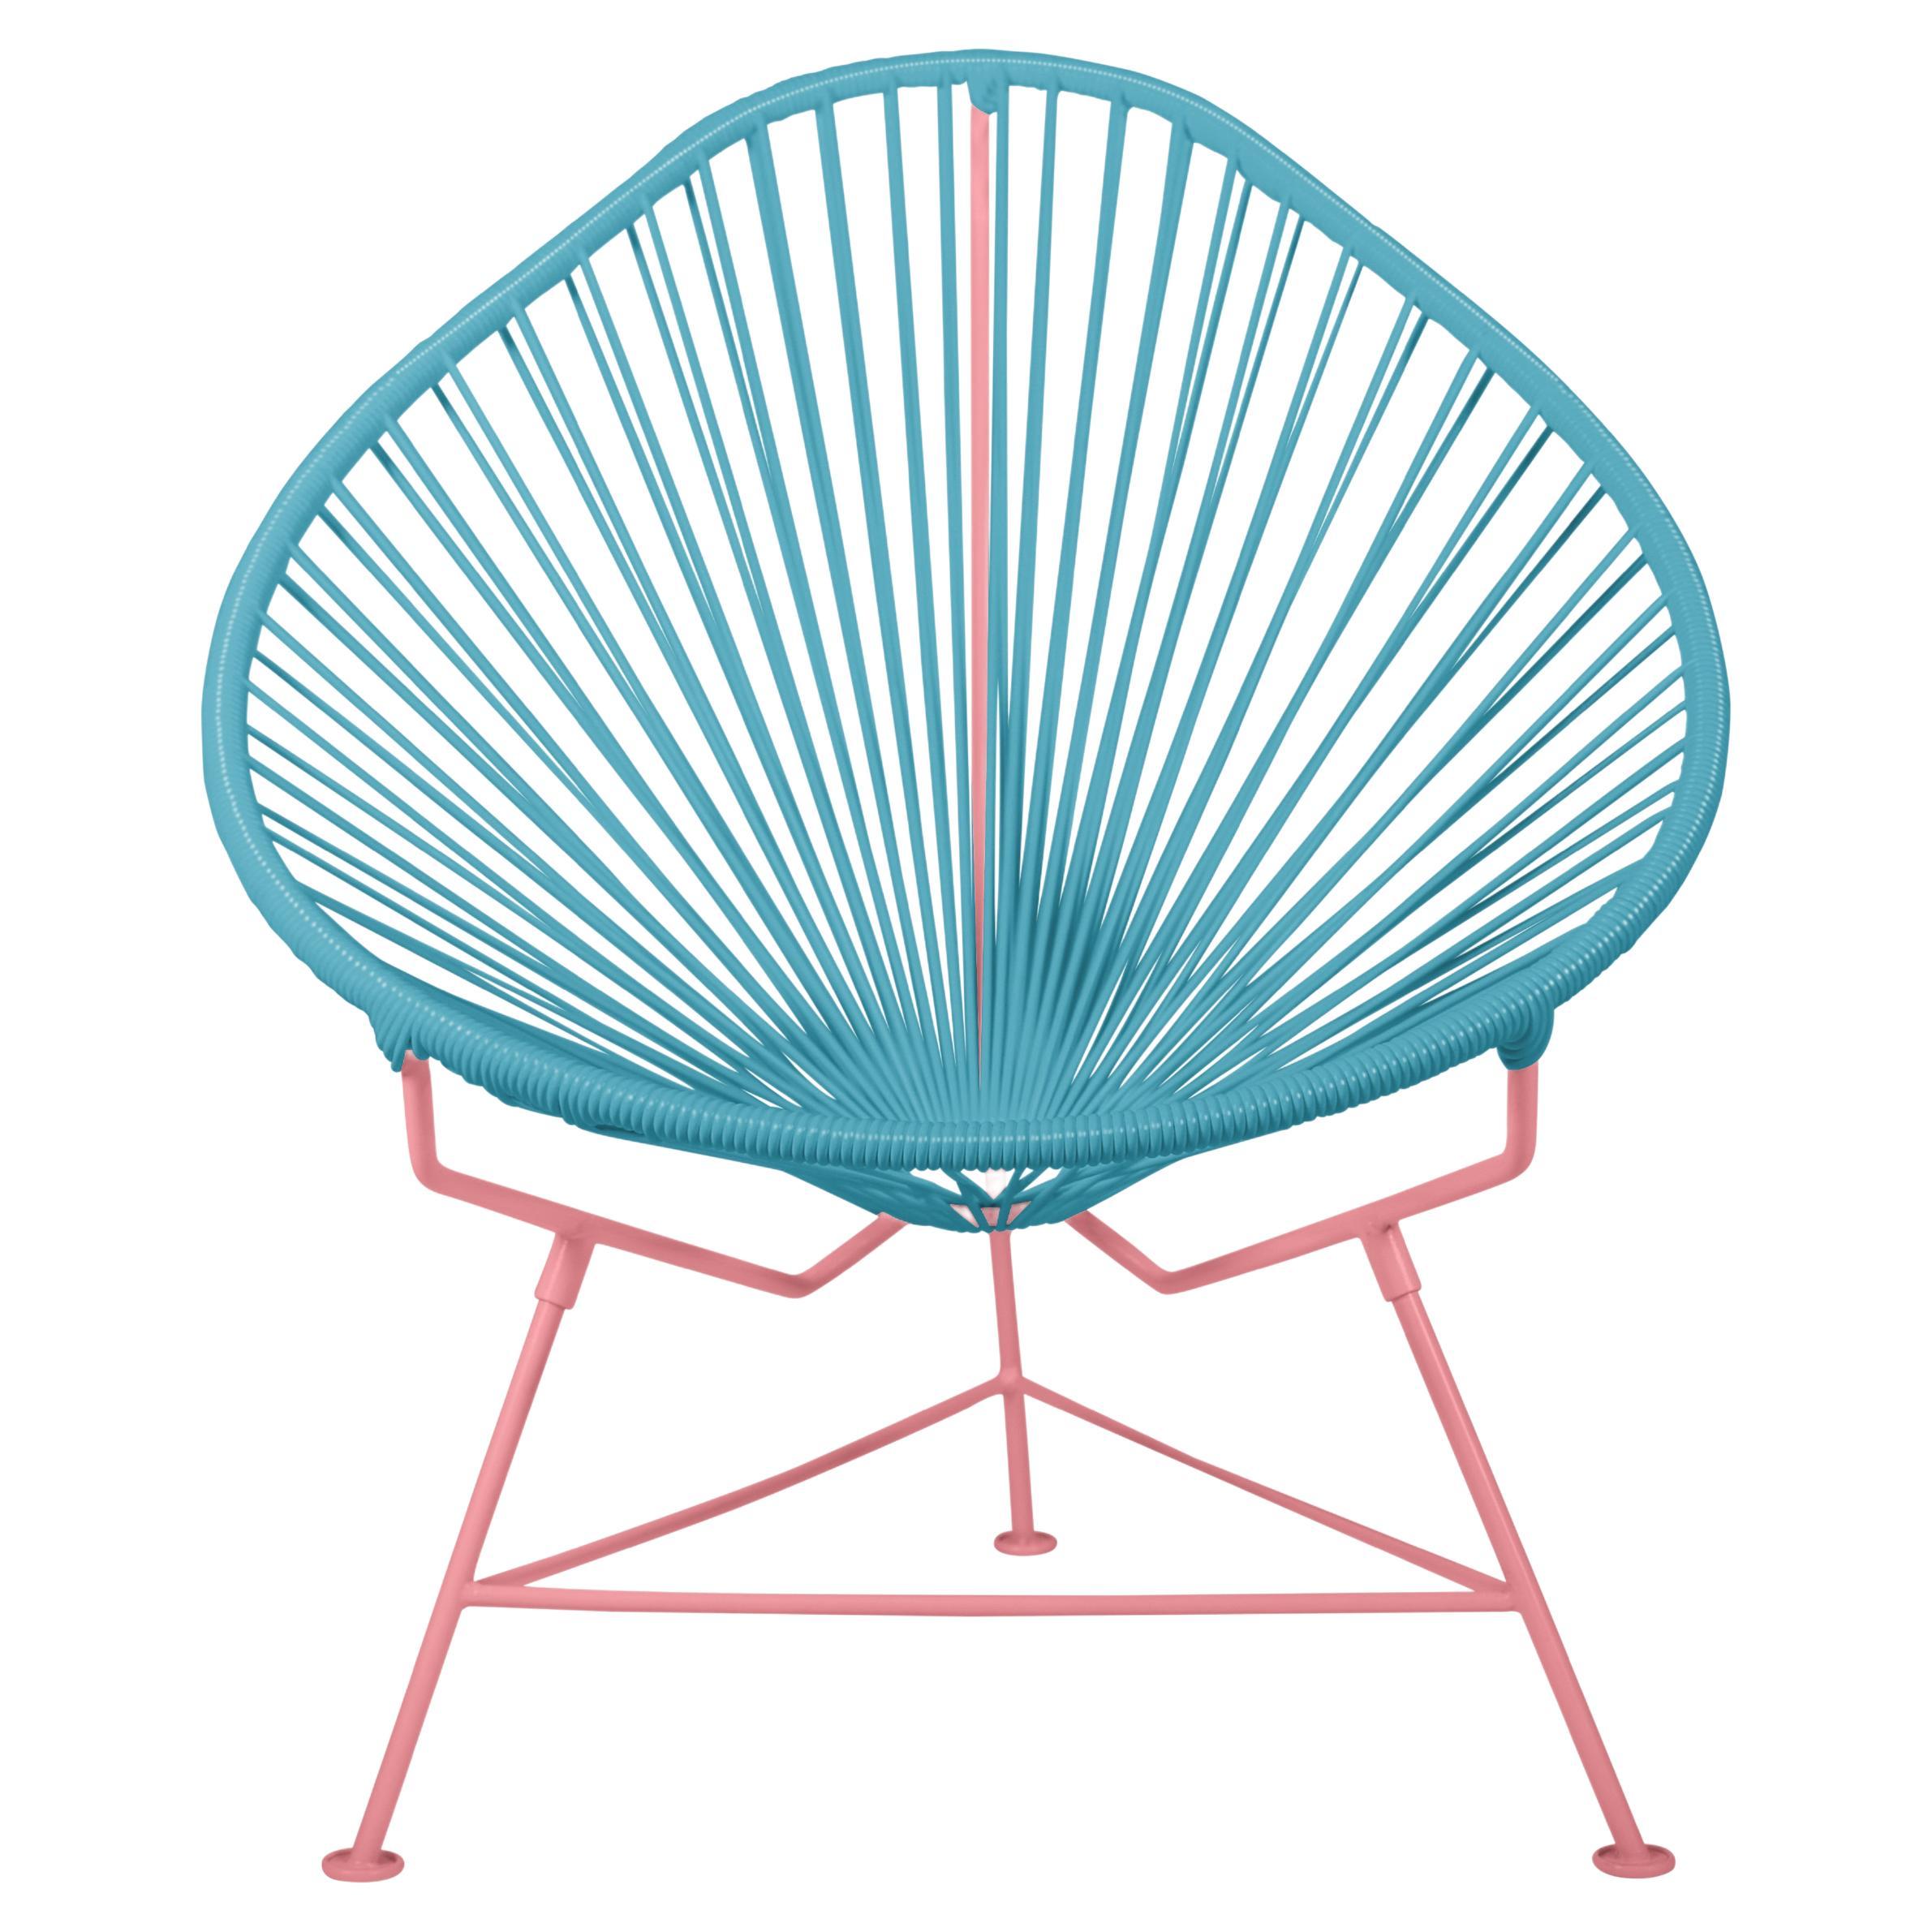 Innit Designs Acapulco Chair Blue Weave on Coral Frame For Sale